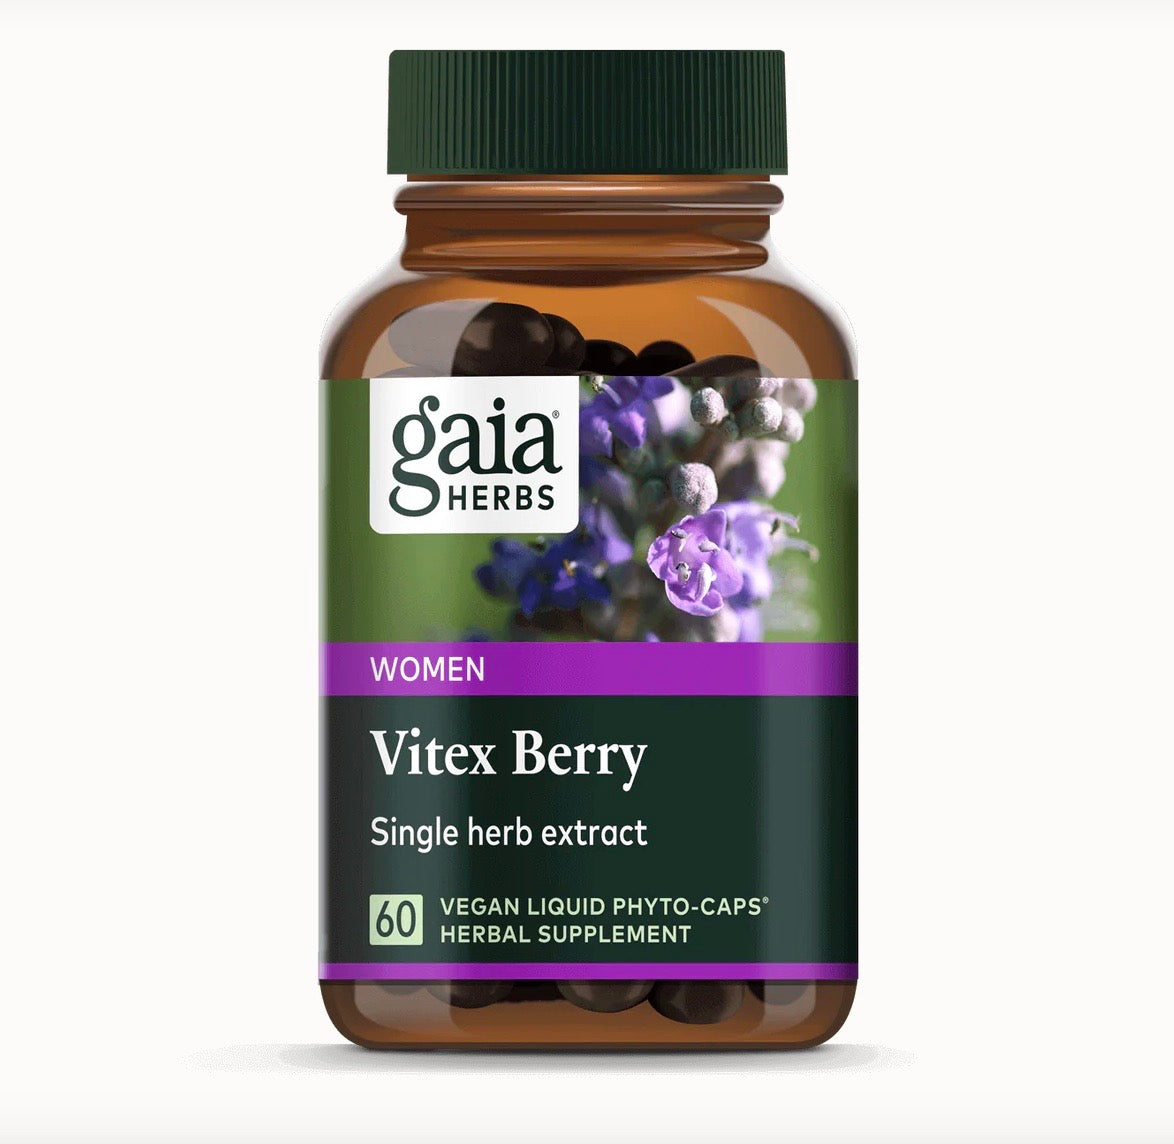 Photo and link of Gaia Herbs Vitex Berry